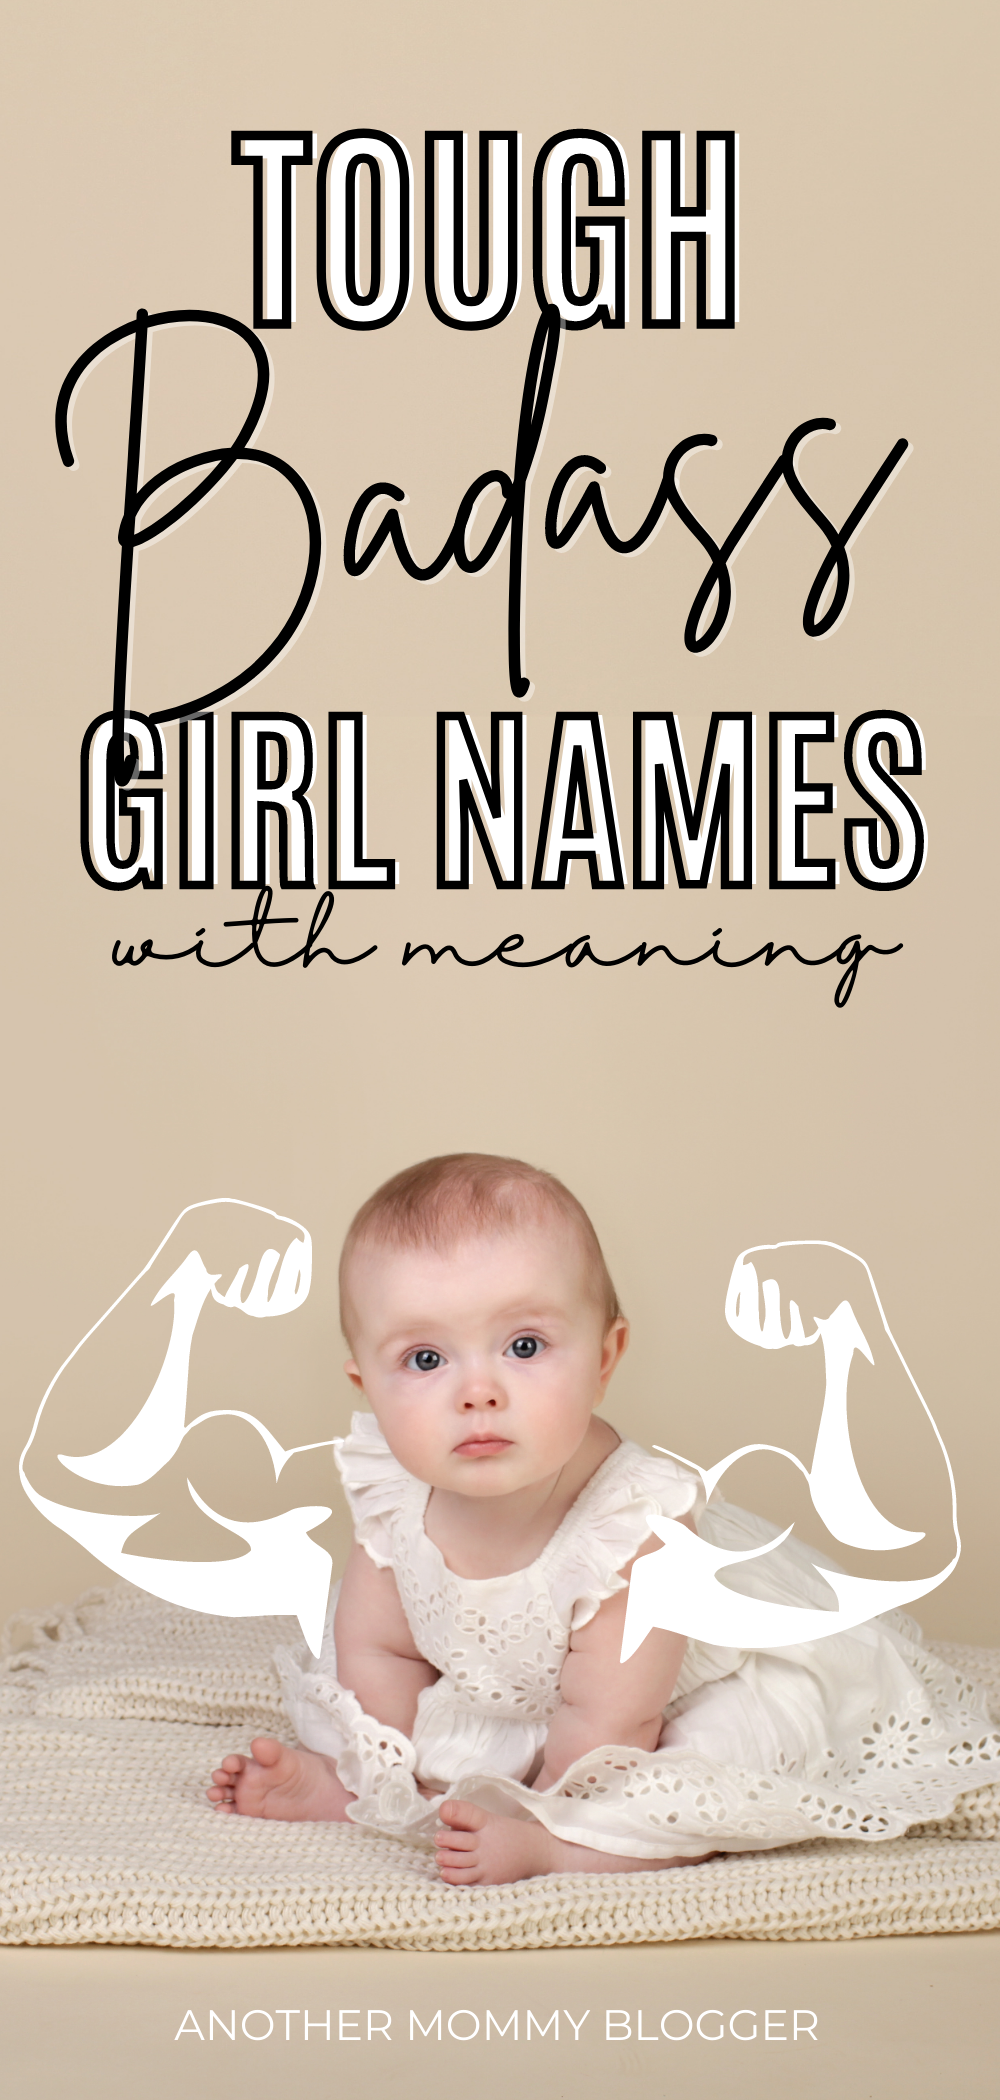 These strong girl names with meaning are badass. This baby girl names list has tough girl names you need to see.